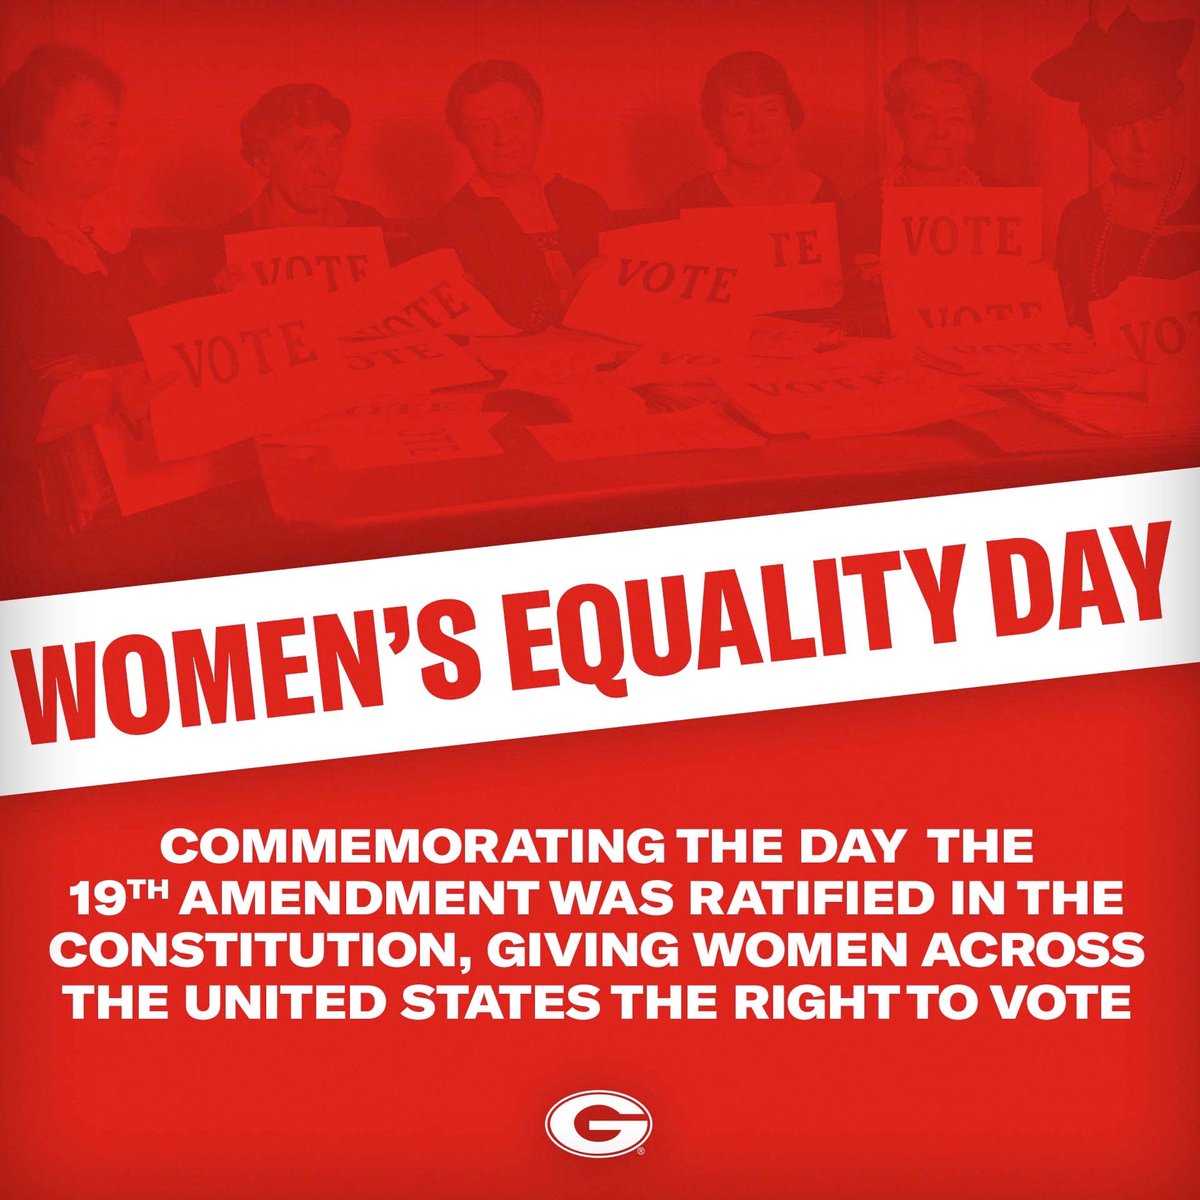 Women’s Equality Day celebrates the passing of the 19th amendment of the Constitution and the suffragists who fought hard for women to have the right to vote. Be sure to register and exercise your right to vote! #WomensEqualityDay | #TheGeorgiaWay